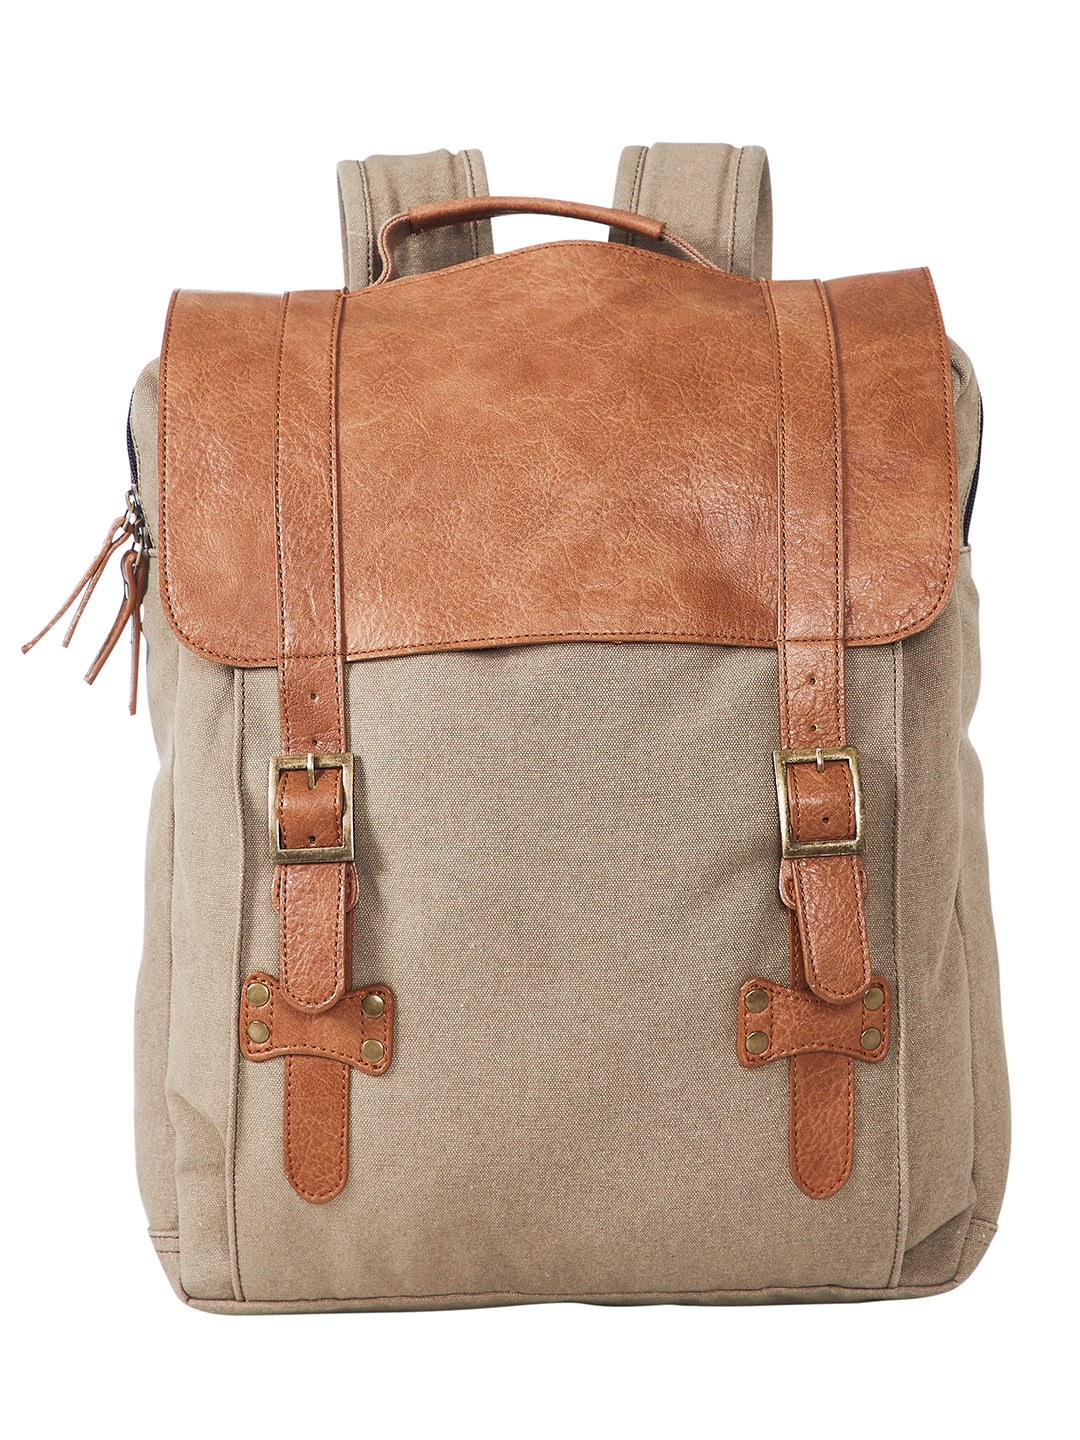 Mona B - Brown 100% cotton canvas back pack for offices schools and colleges with 14" laptop sleeve and stylish design